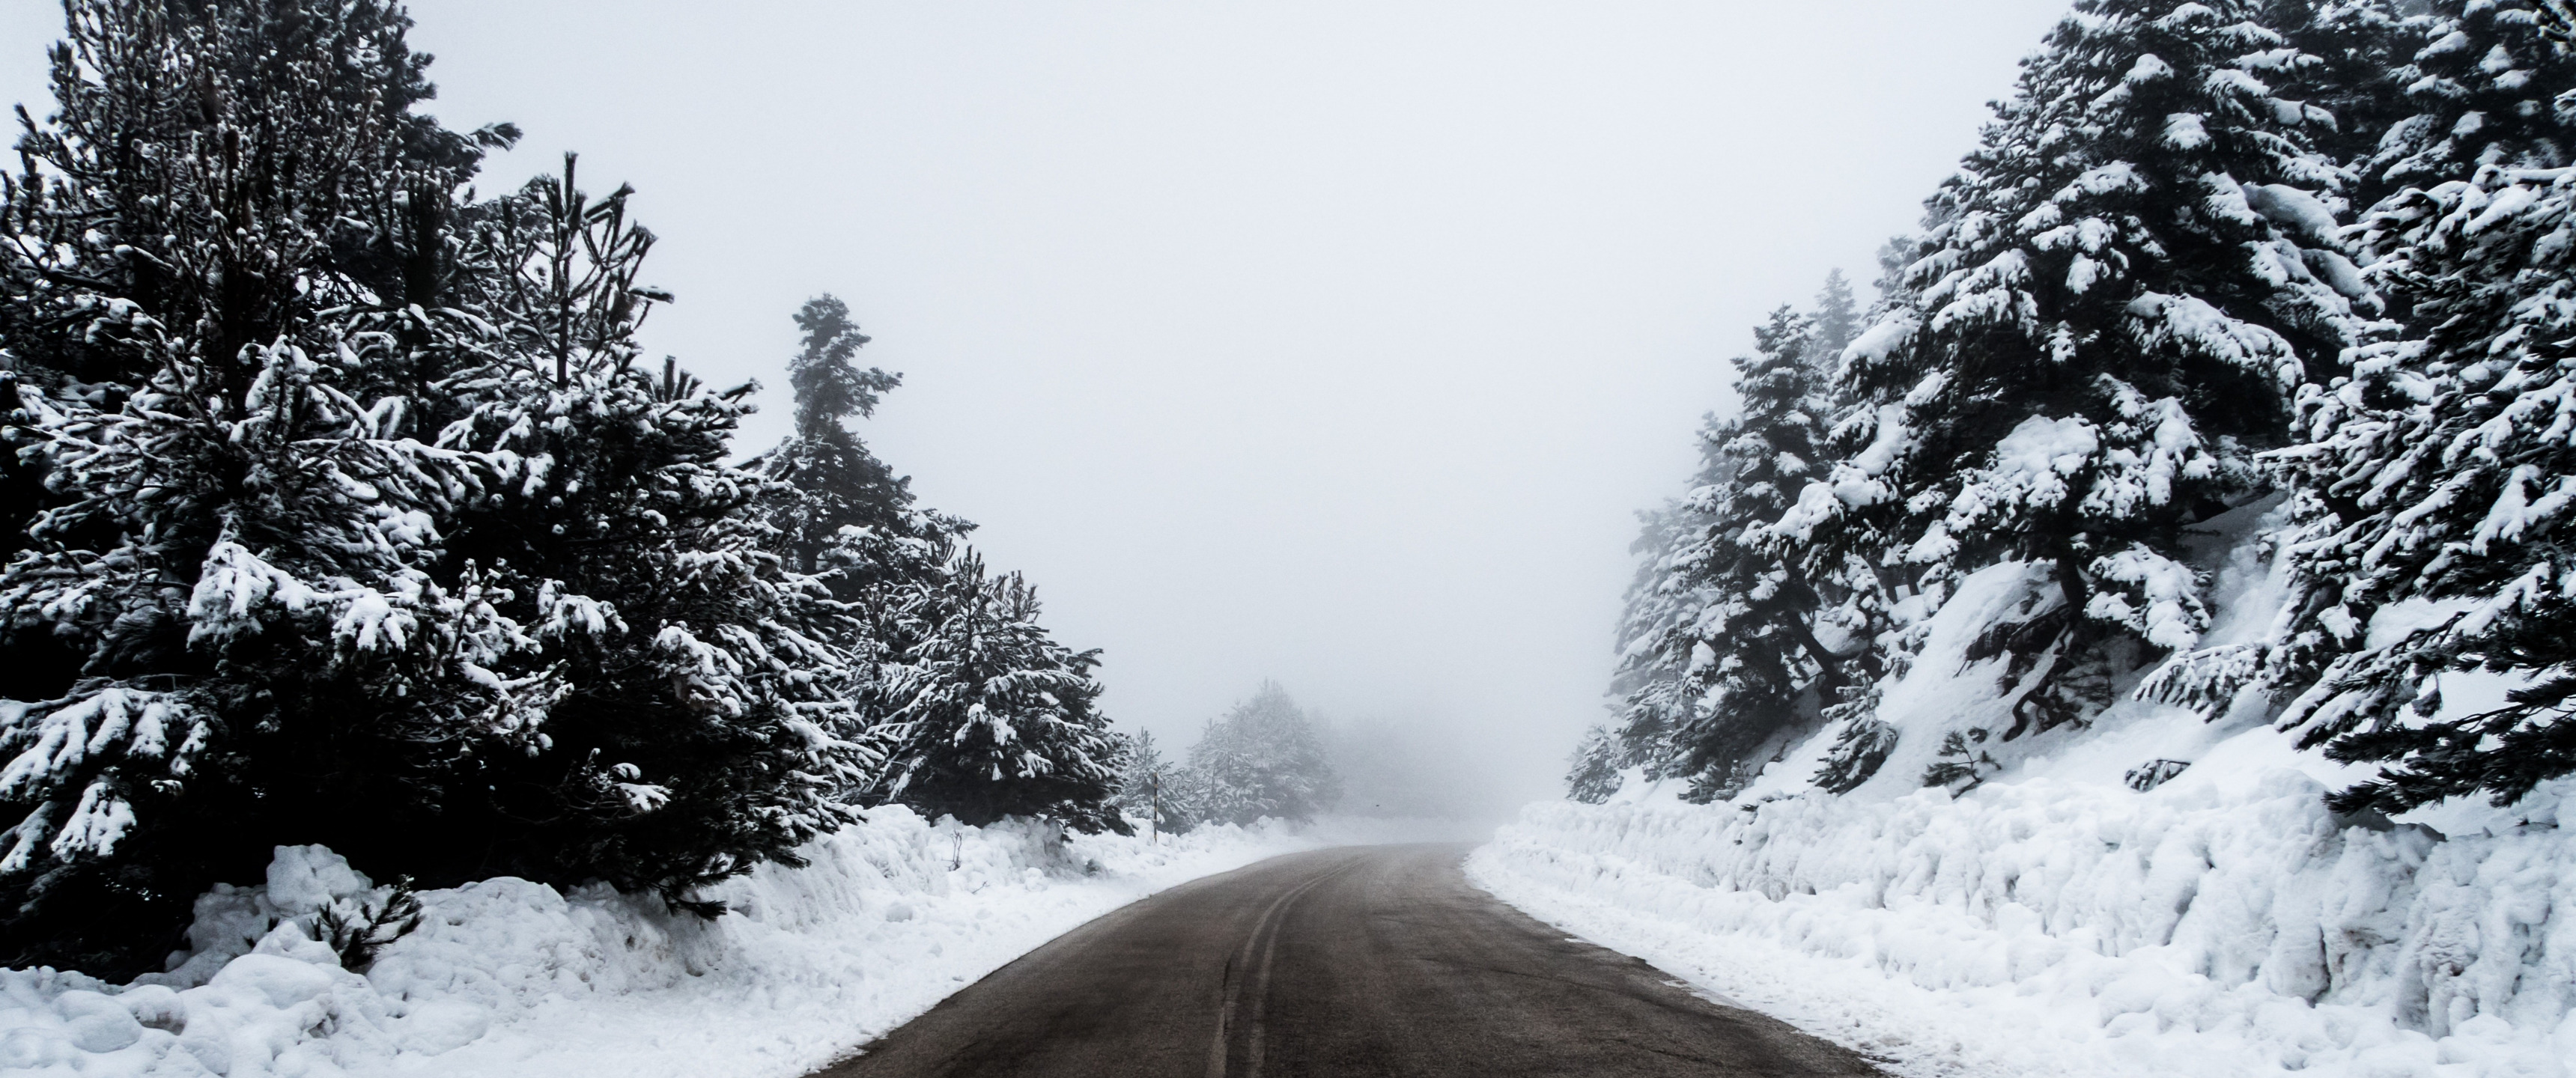 ultrawide snow road wallpaper and background. Other